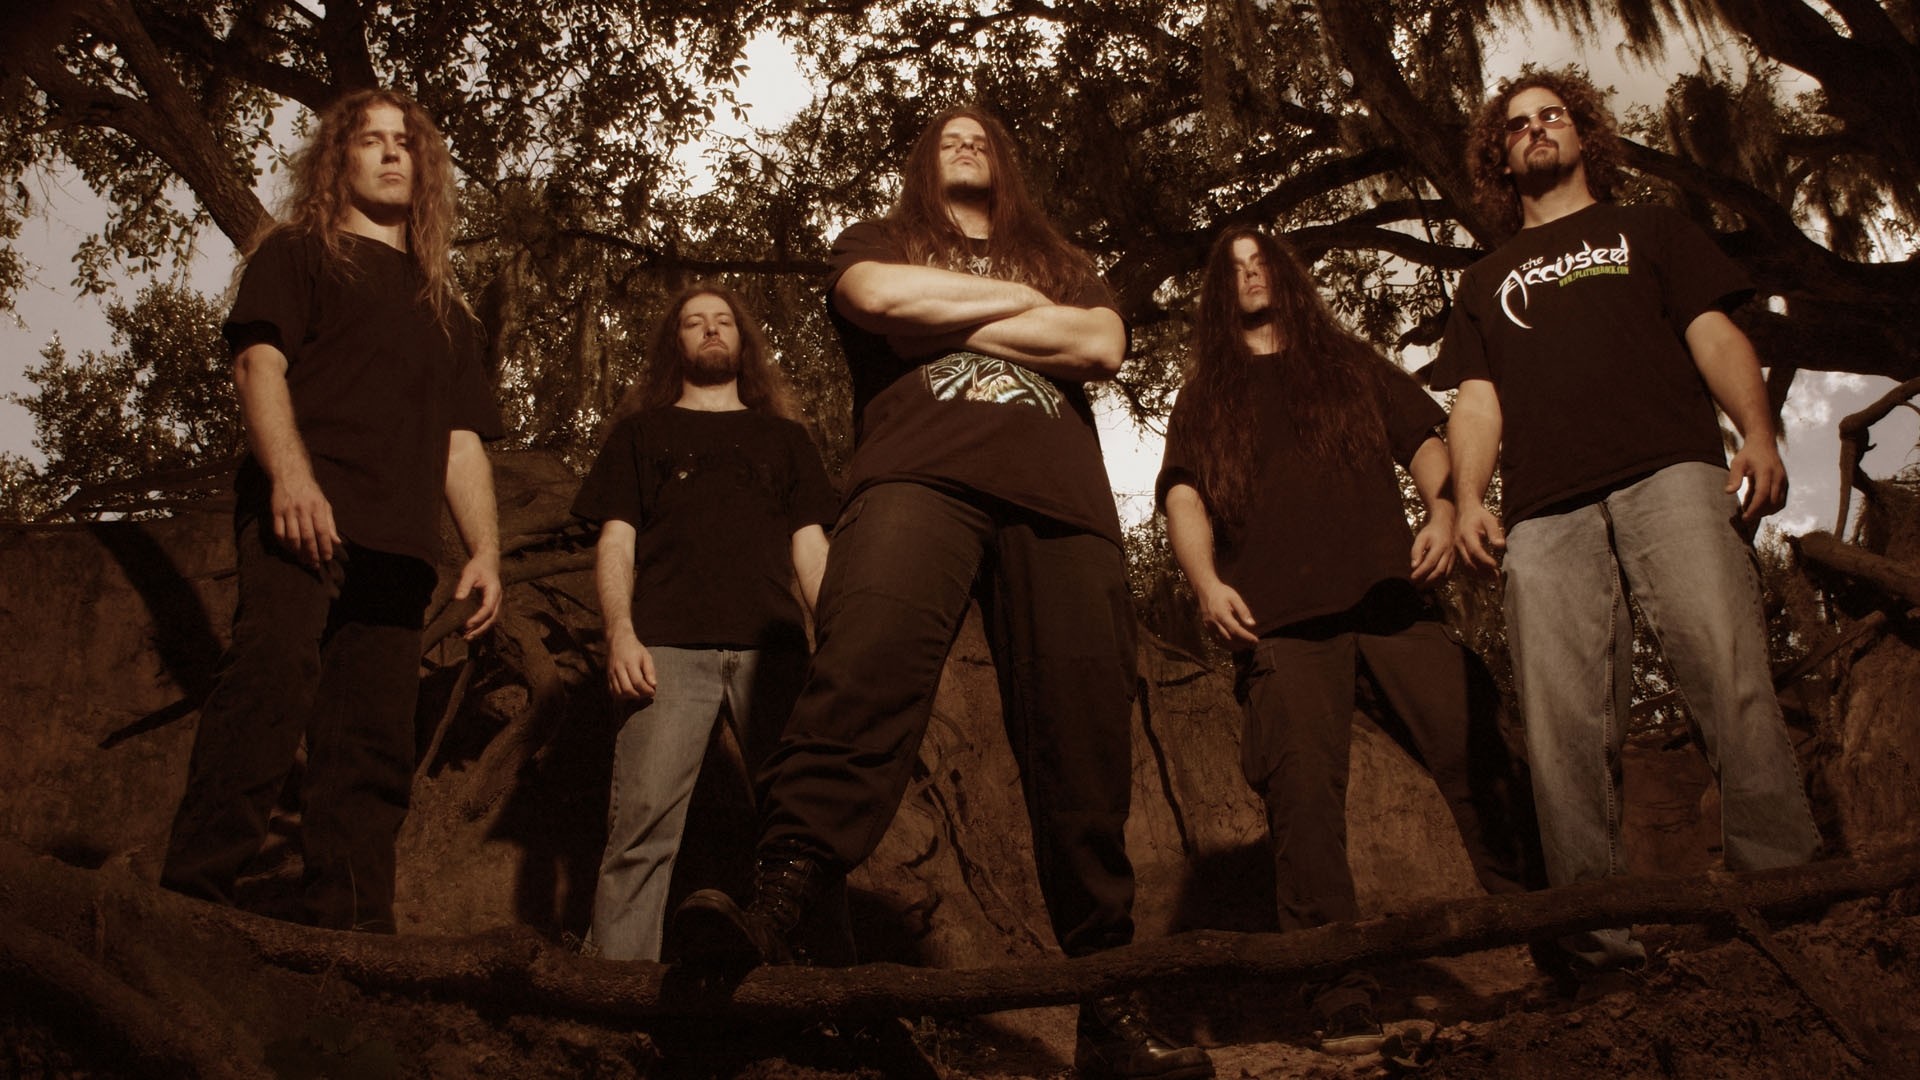 1920x1080  Wallpaper cannibal corpse, trees, t-shirts, sky, band